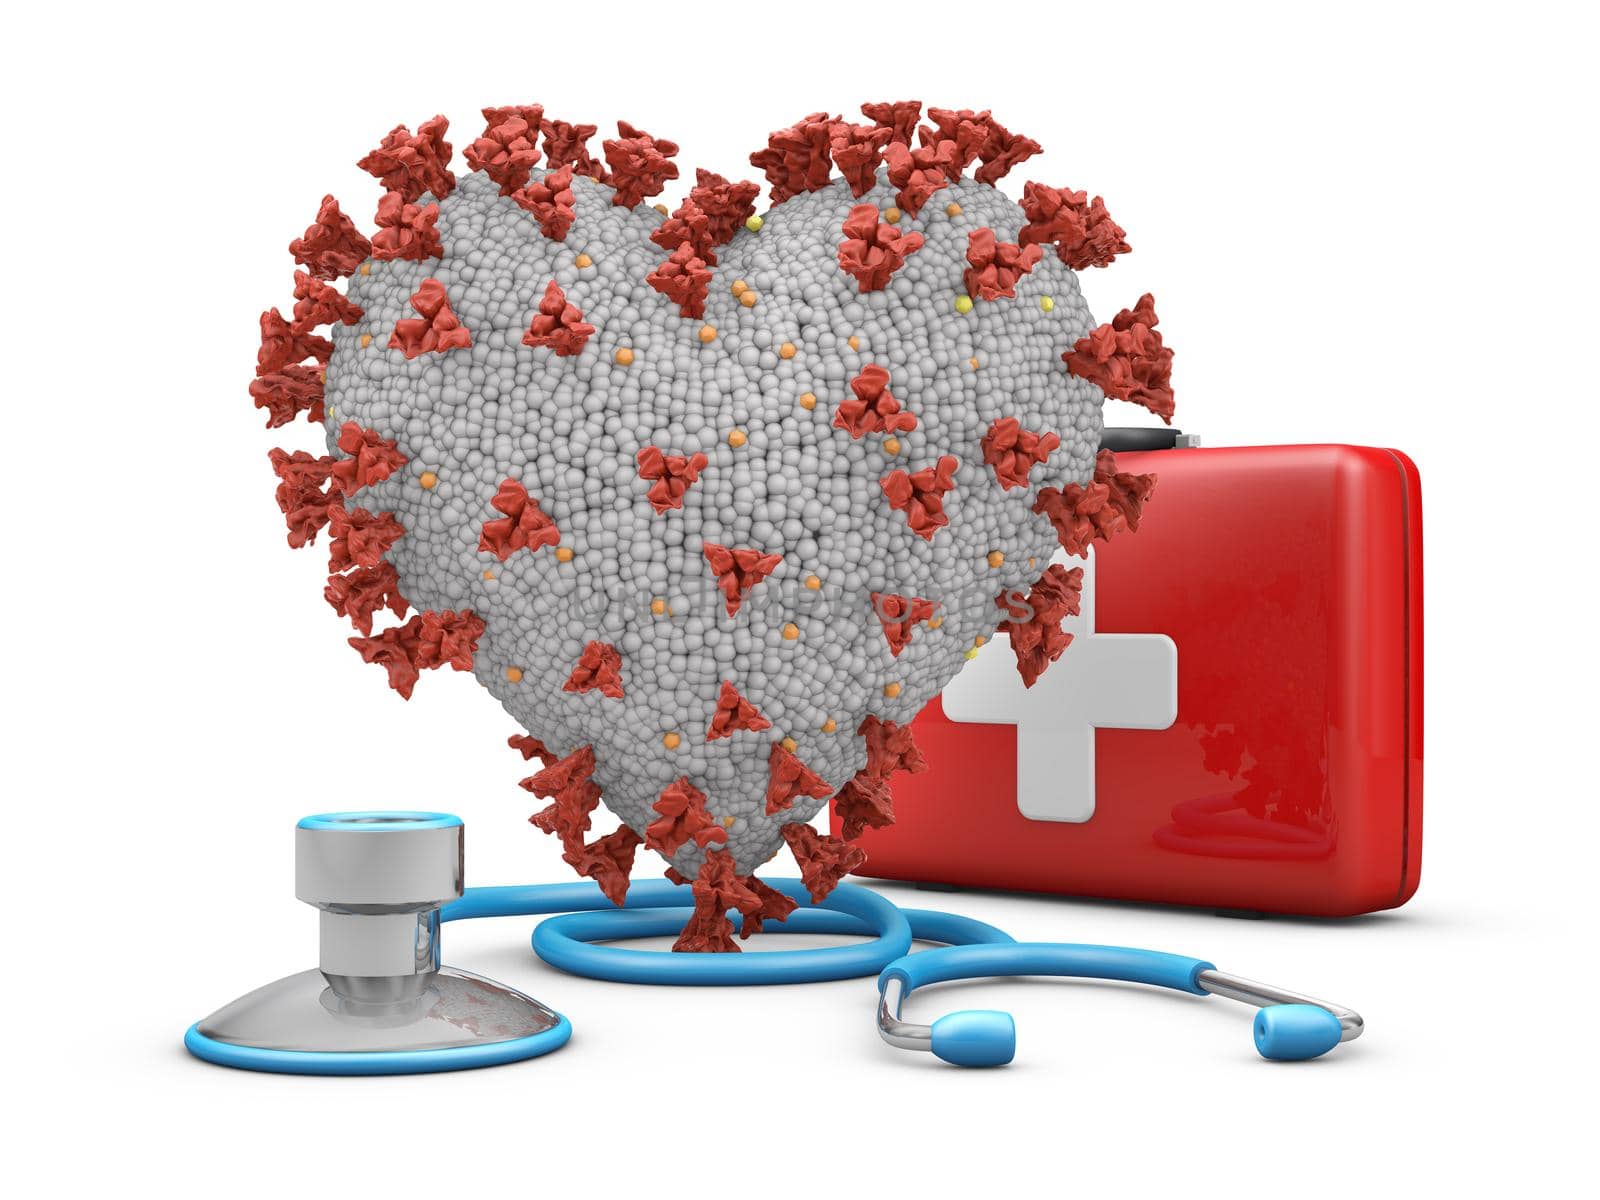 Coronavirus in the shape of a heart next to a stethoscope and a red suitcase. 3D rendering.